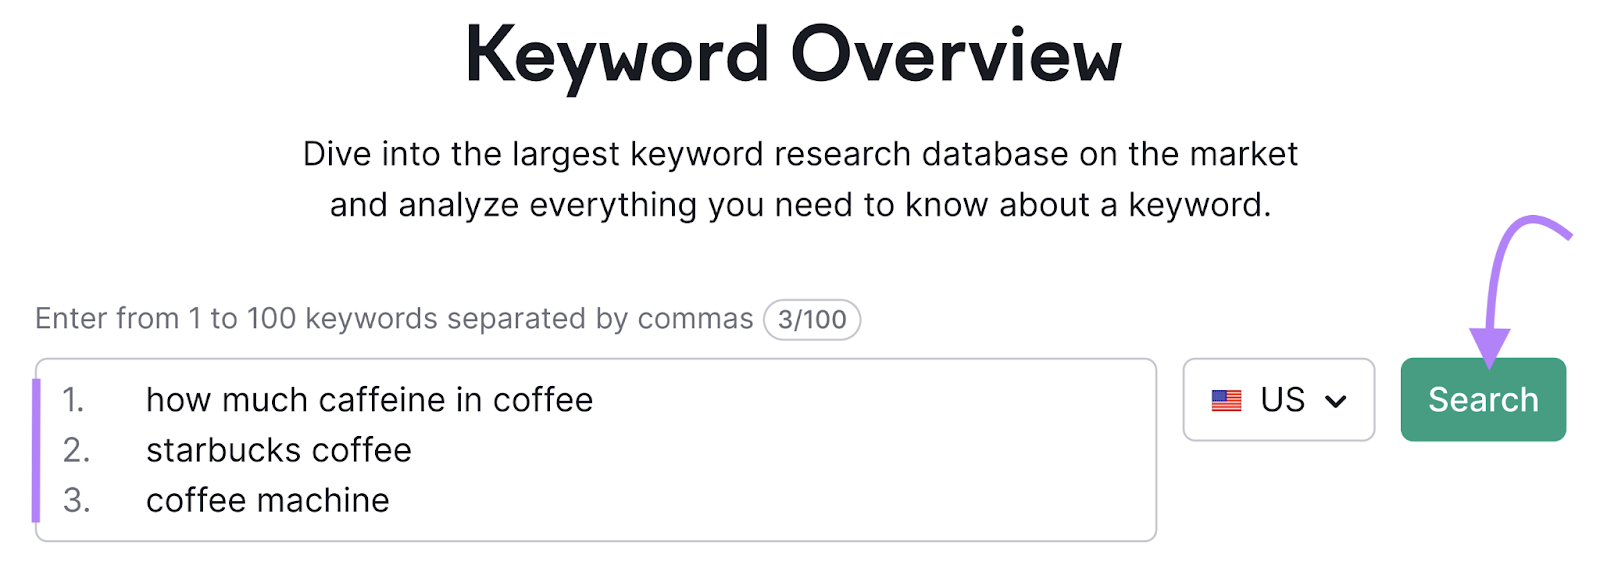 screenshot of Keyword Overview tool search bar